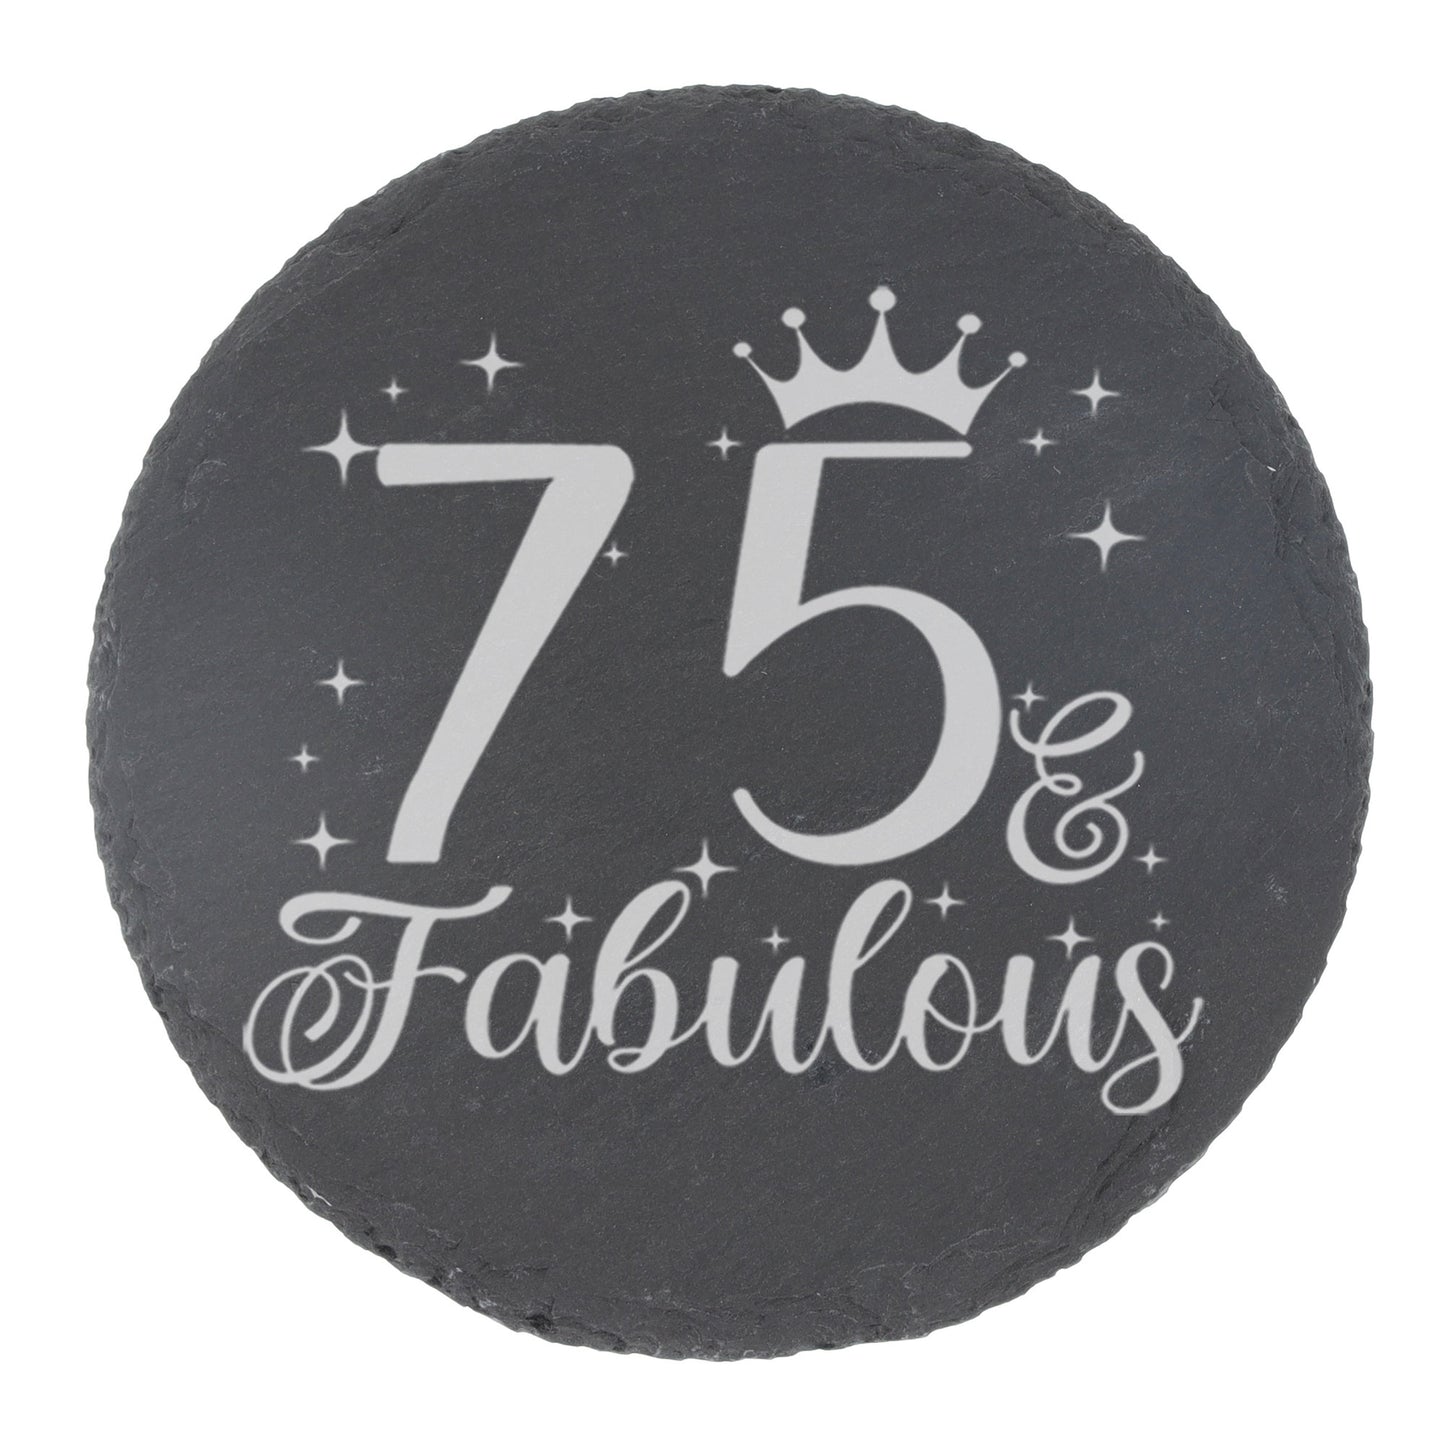 75 & Fabulous 75th Birthday Gift Engraved Wine Glass and/or Coaster Set  - Always Looking Good -   